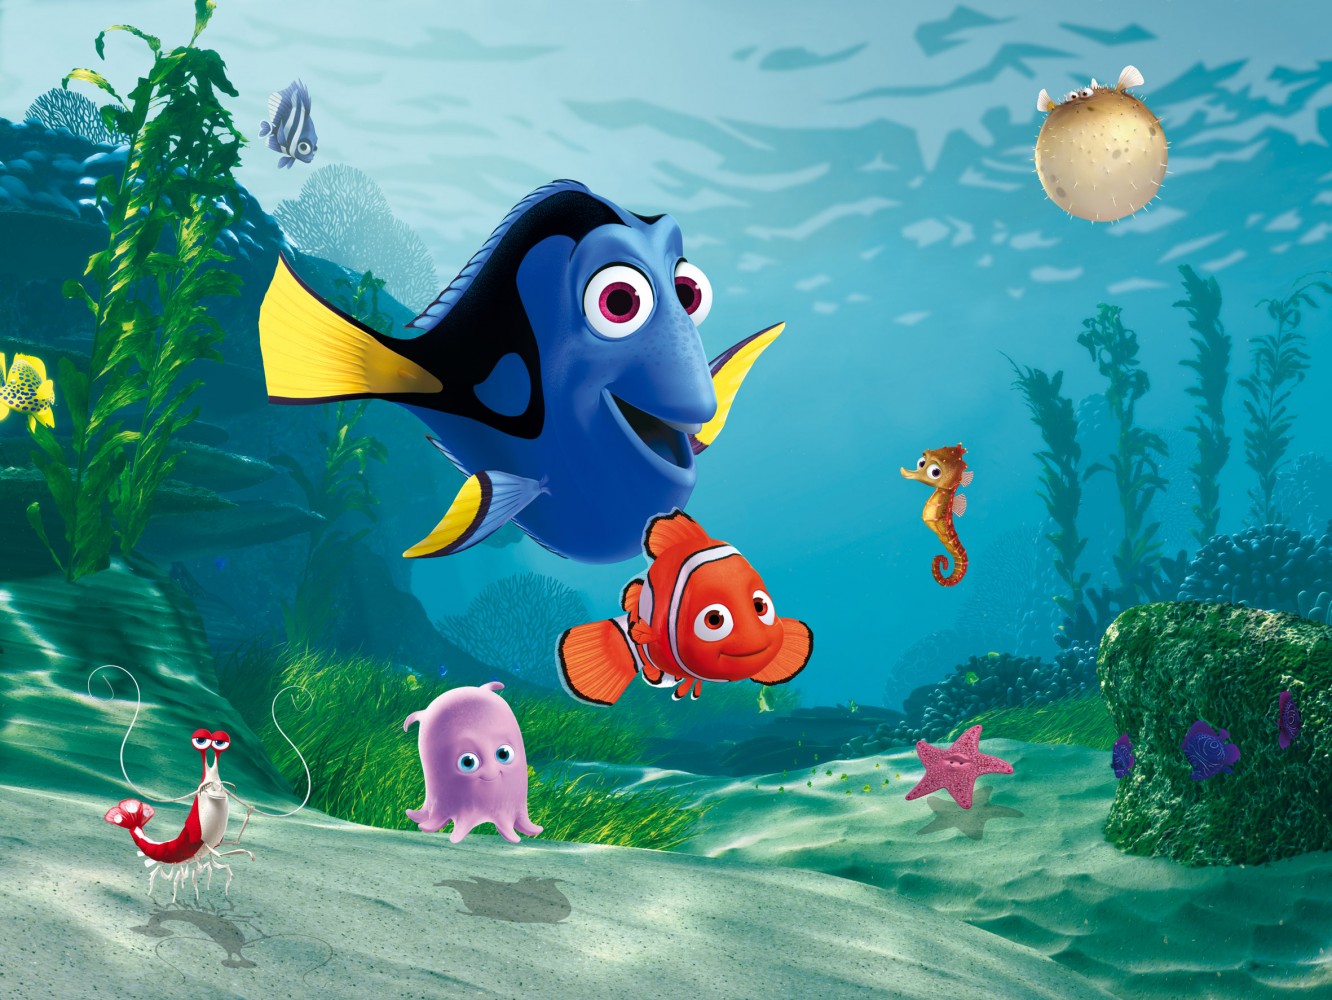 Finding Nemo HD Images Wallpapers 4088 - HD Wallpapers Site